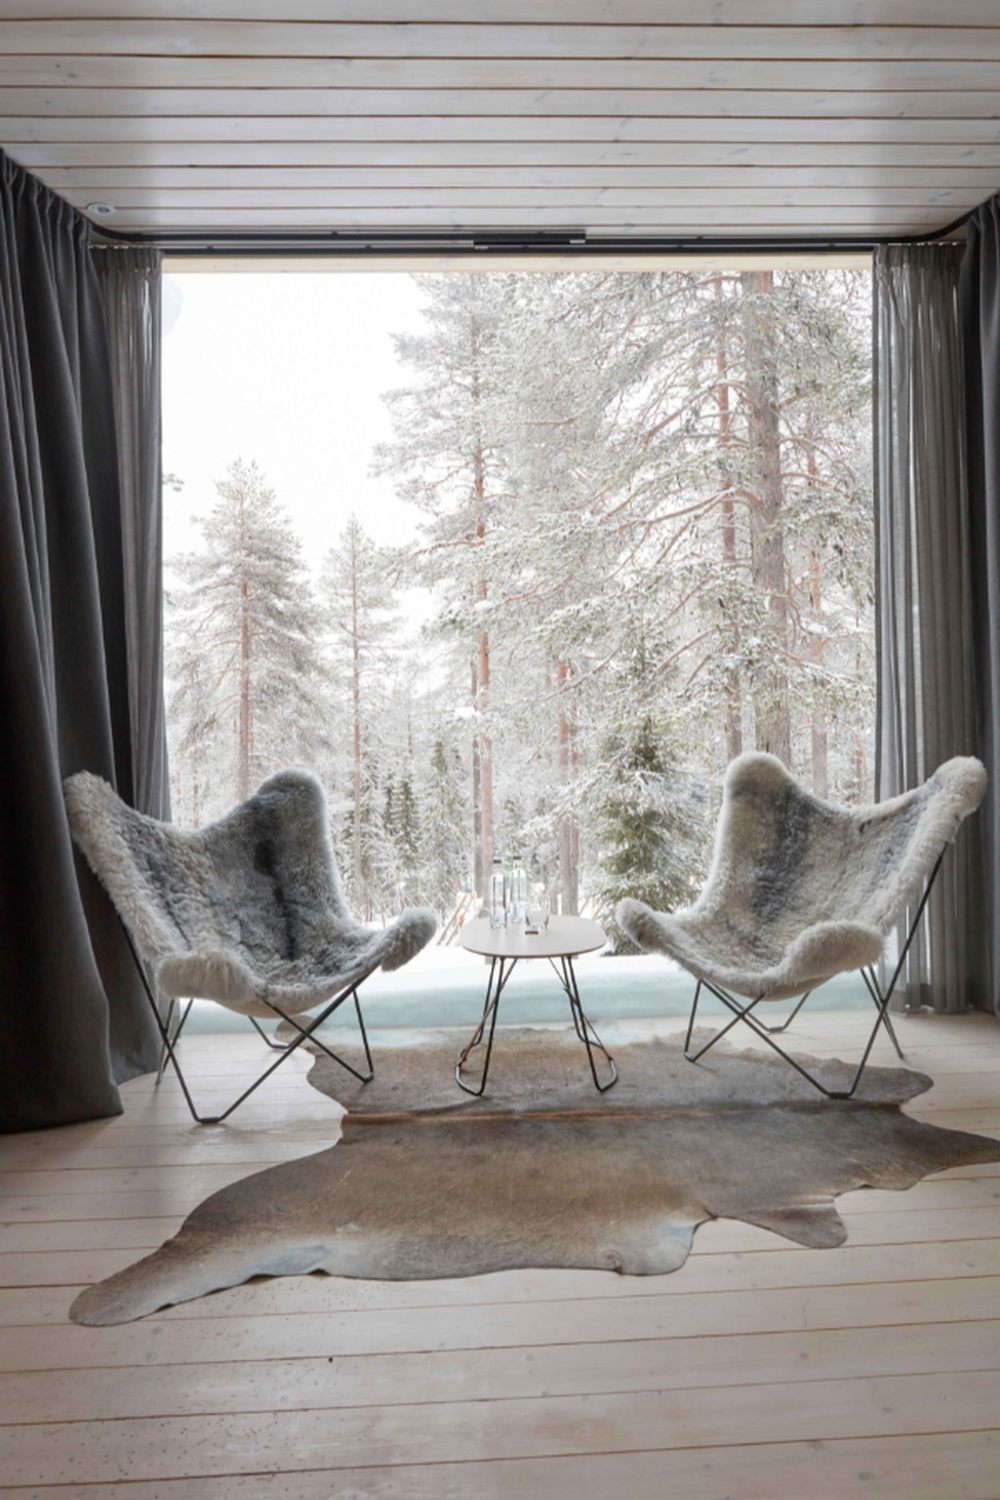 coffee table between two fur butterfly chairs in ski chalet with animal skin rug, snowy forest with pines in background